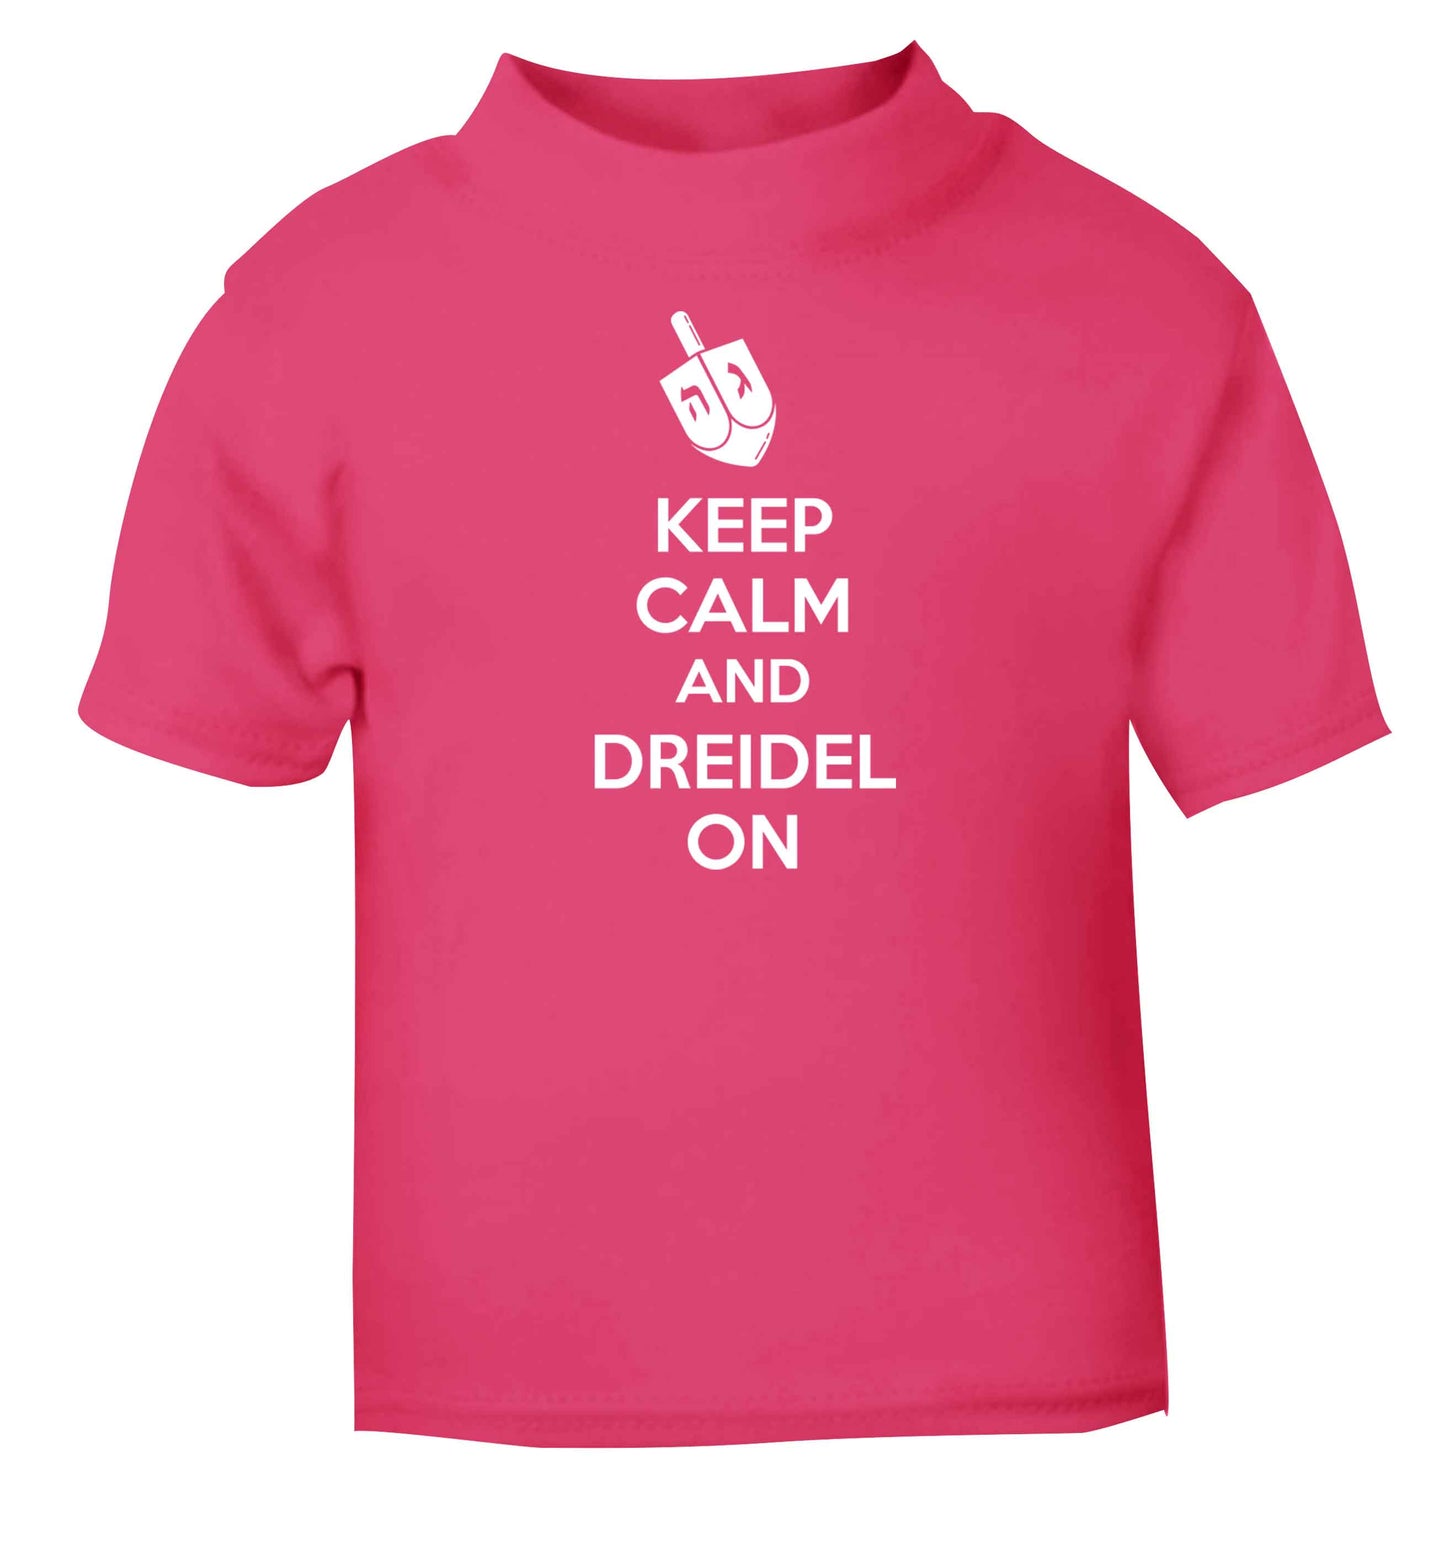 Keep calm and dreidel on pink baby toddler Tshirt 2 Years